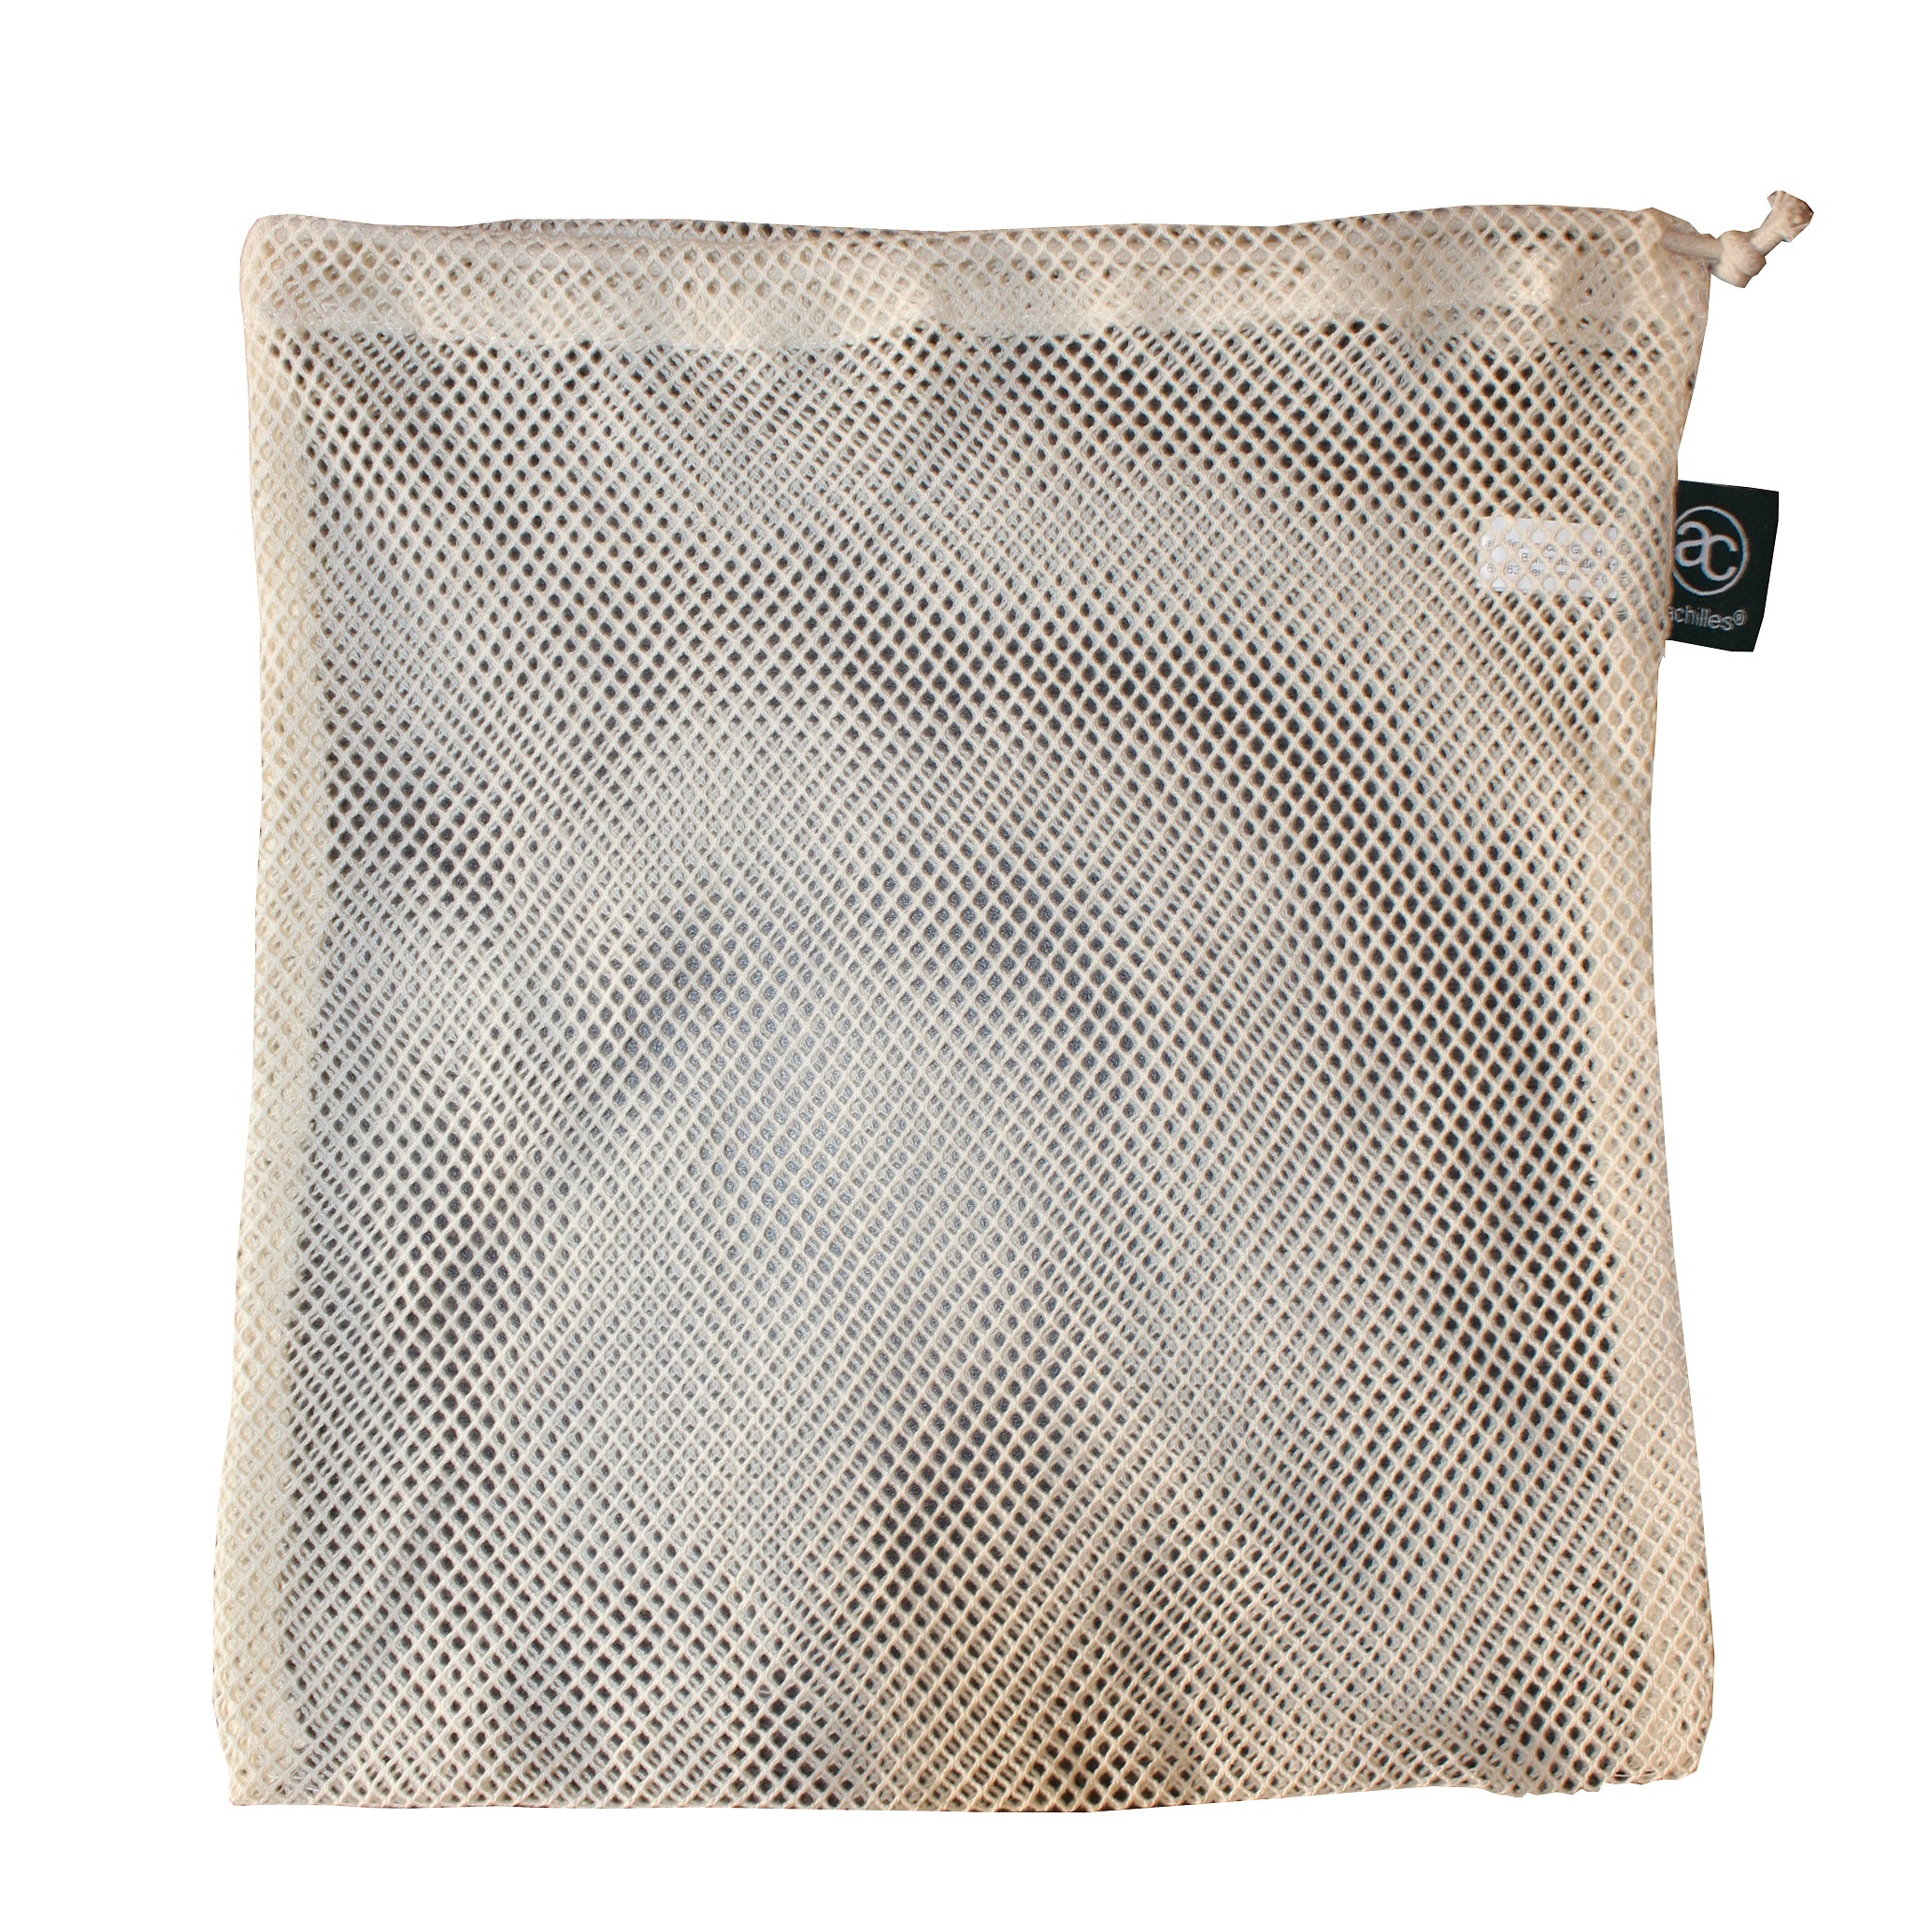 Grocery Vegetable And Fruit Packaging Cotton Mesh Bag